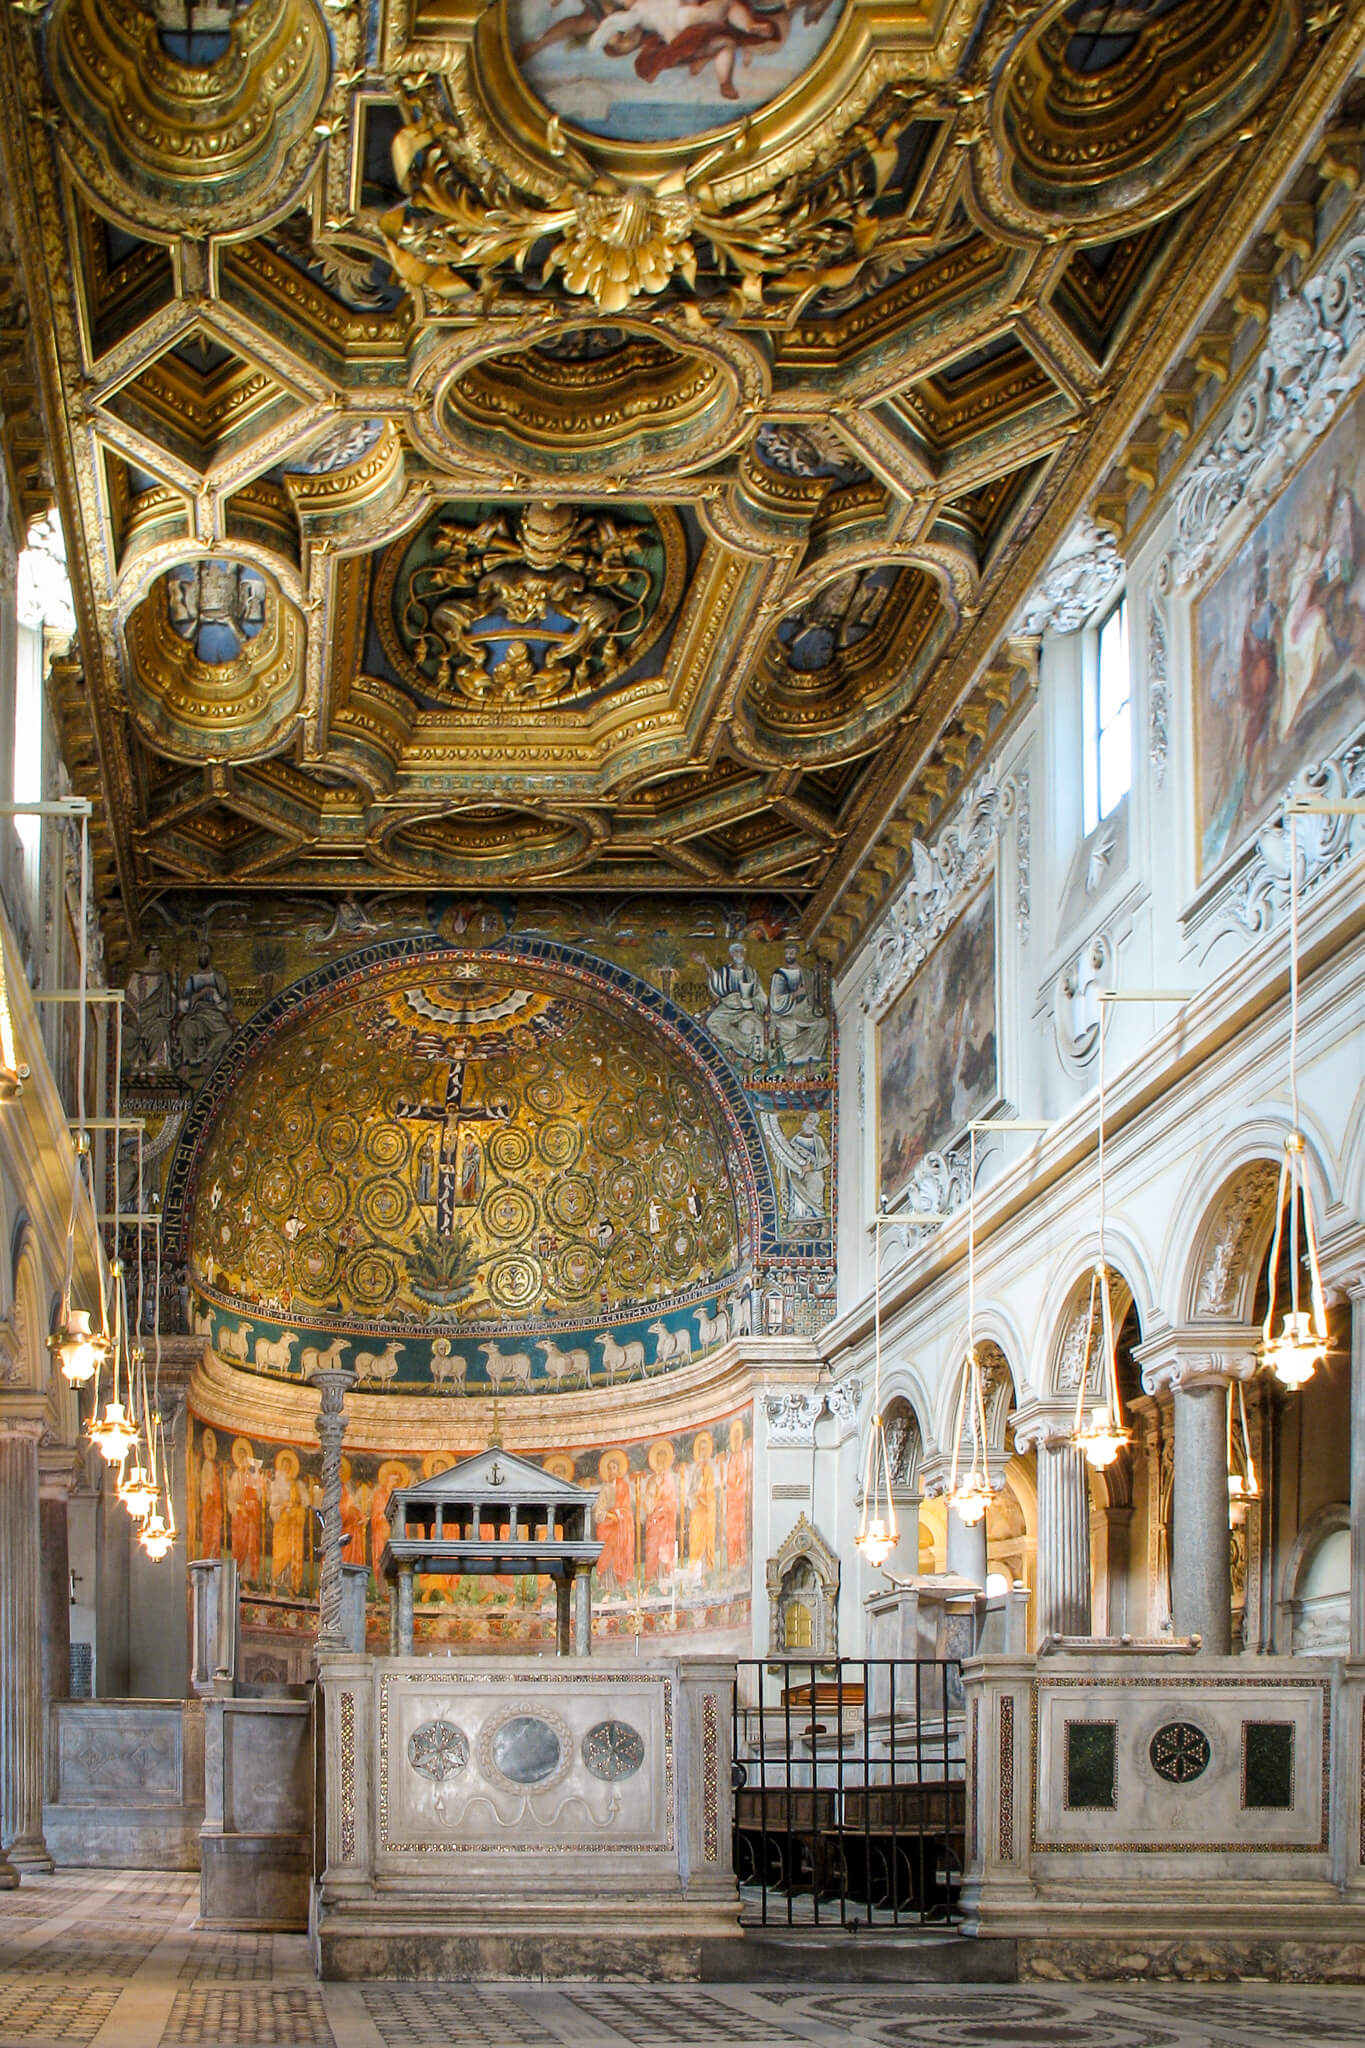 Interior of the San Clemente Basilica in Rome